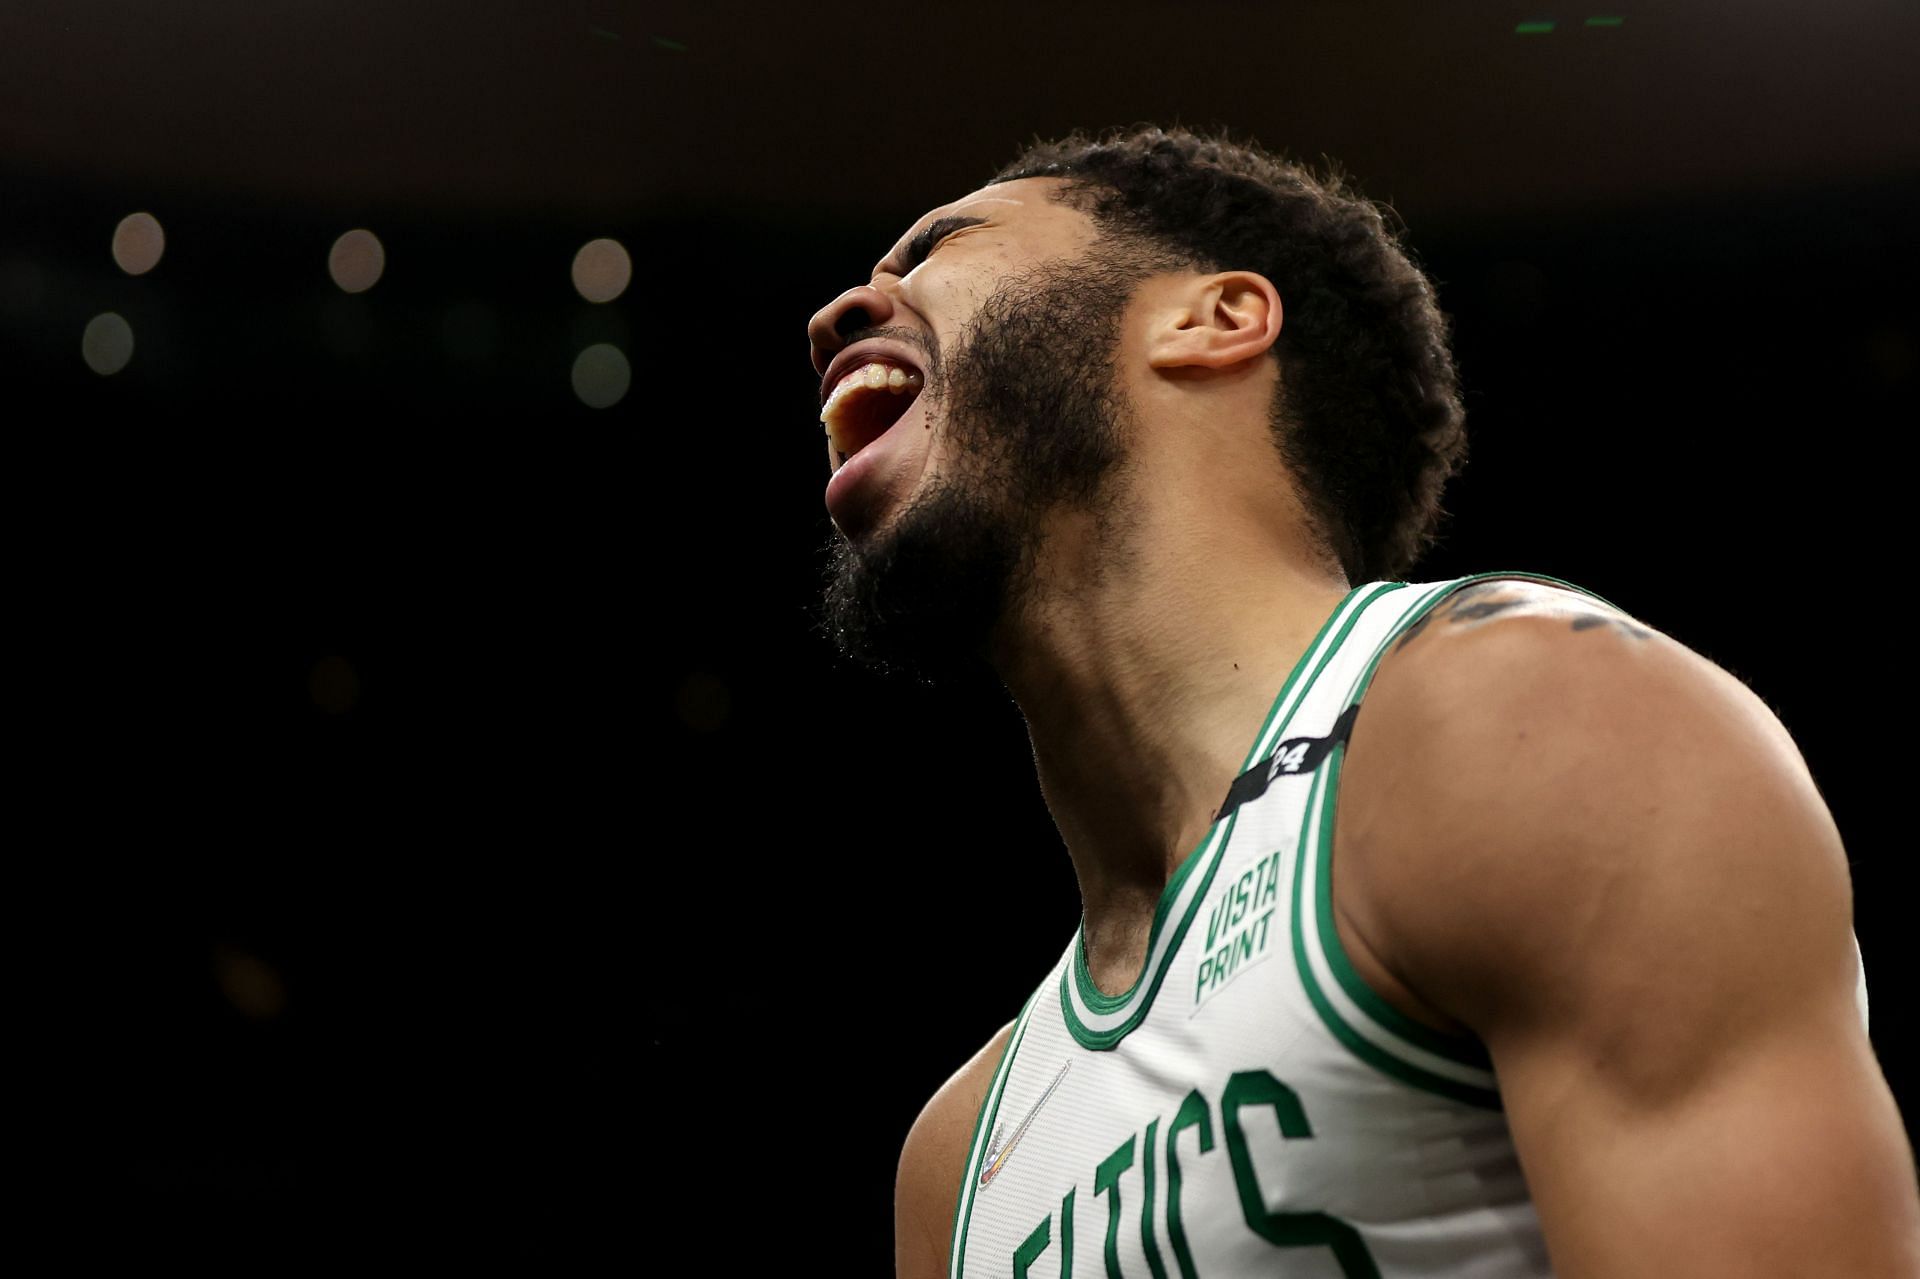 Jayson Tatum of the Boston Celtics reacts during the second half against the Atlanta Hawks at TD Garden on March 0, 2022 in Boston, Mass. The Celtics defeat the Hawks 107-98.